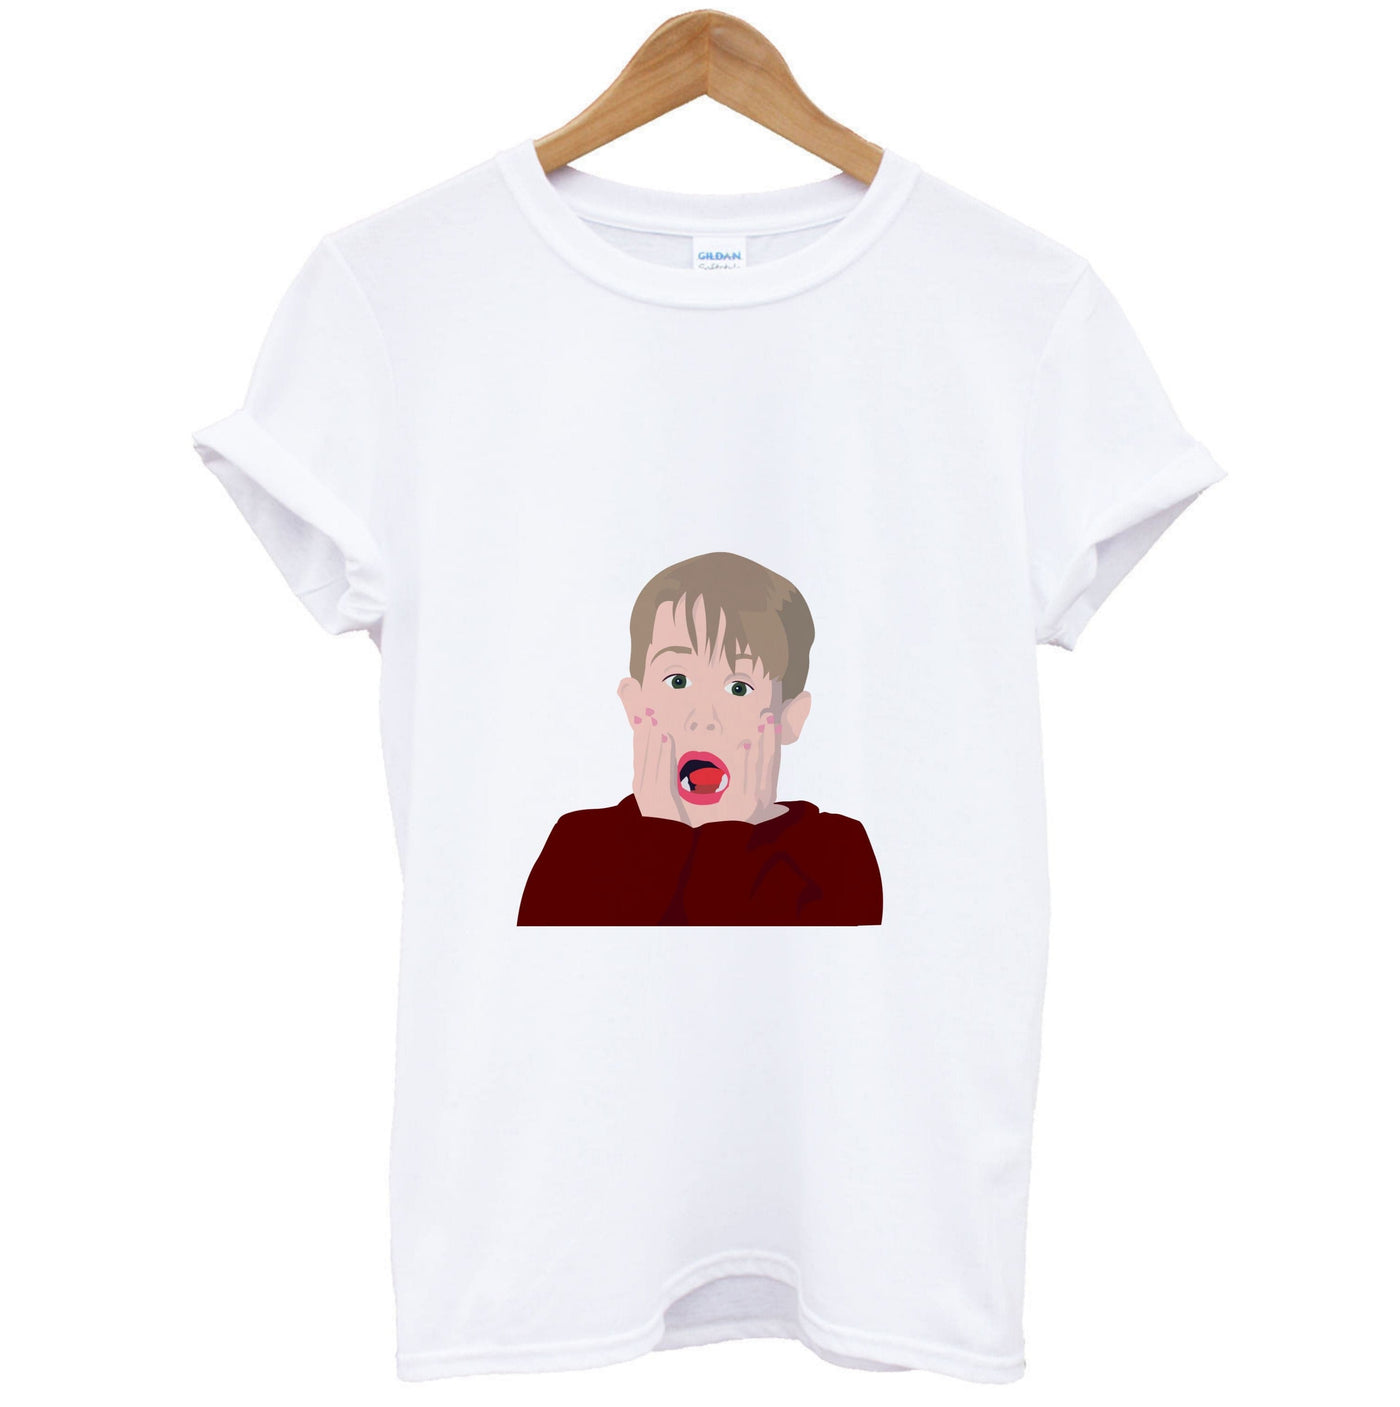 Kevin Shocked! - Home Alone T-Shirt